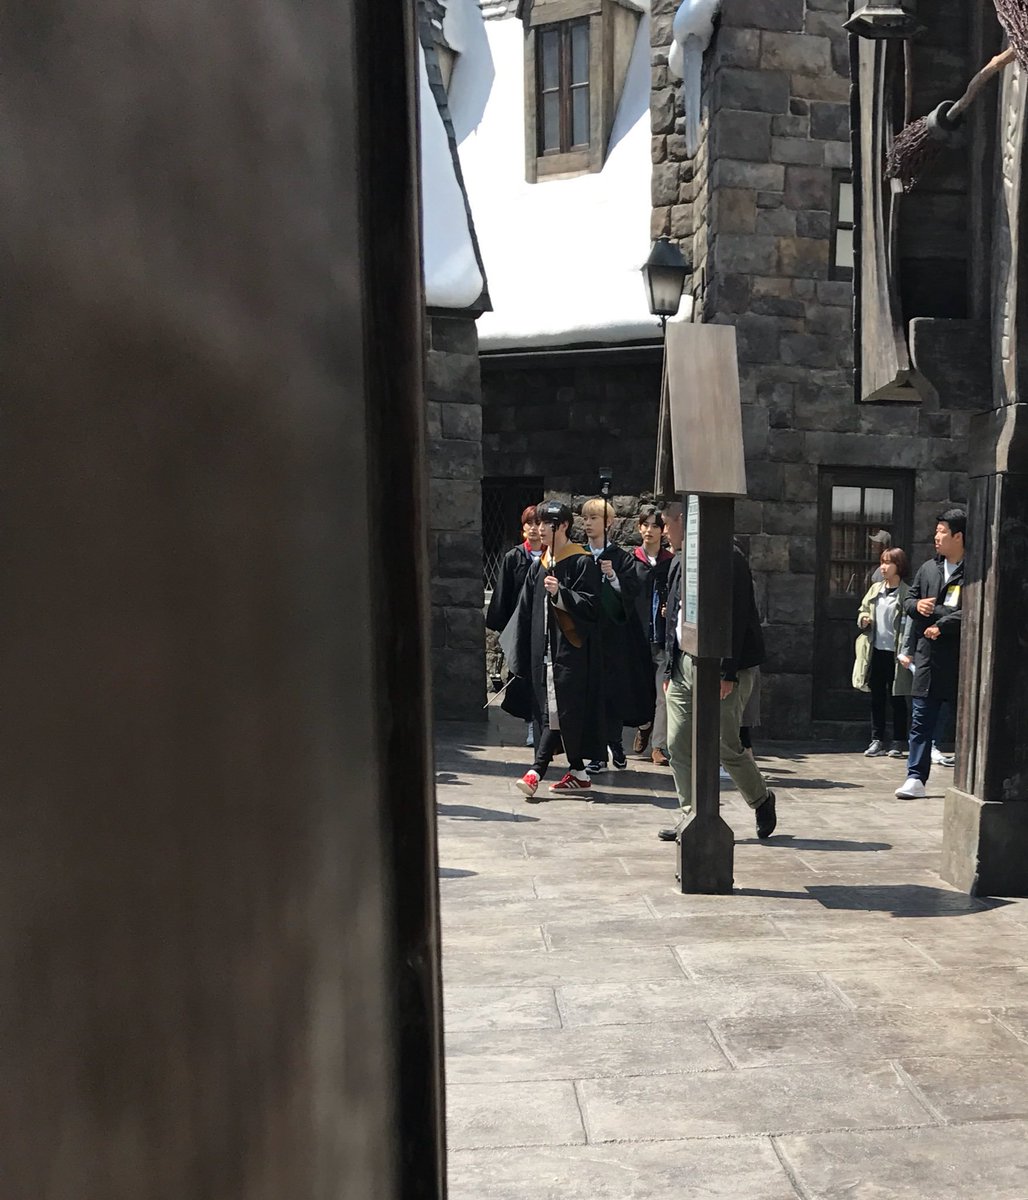 170412 >_____< Taeil, Taeyong, Doyoung, Yuta & Winwin spotted by OP at Japan tl film "NCT LIFE in OSAKA!" (3) 1st pic: op spotted taeil on minimarket in Japan.2nd pic: the boys are having fun in Universal Studio in Japan on Harry Potter Land! 